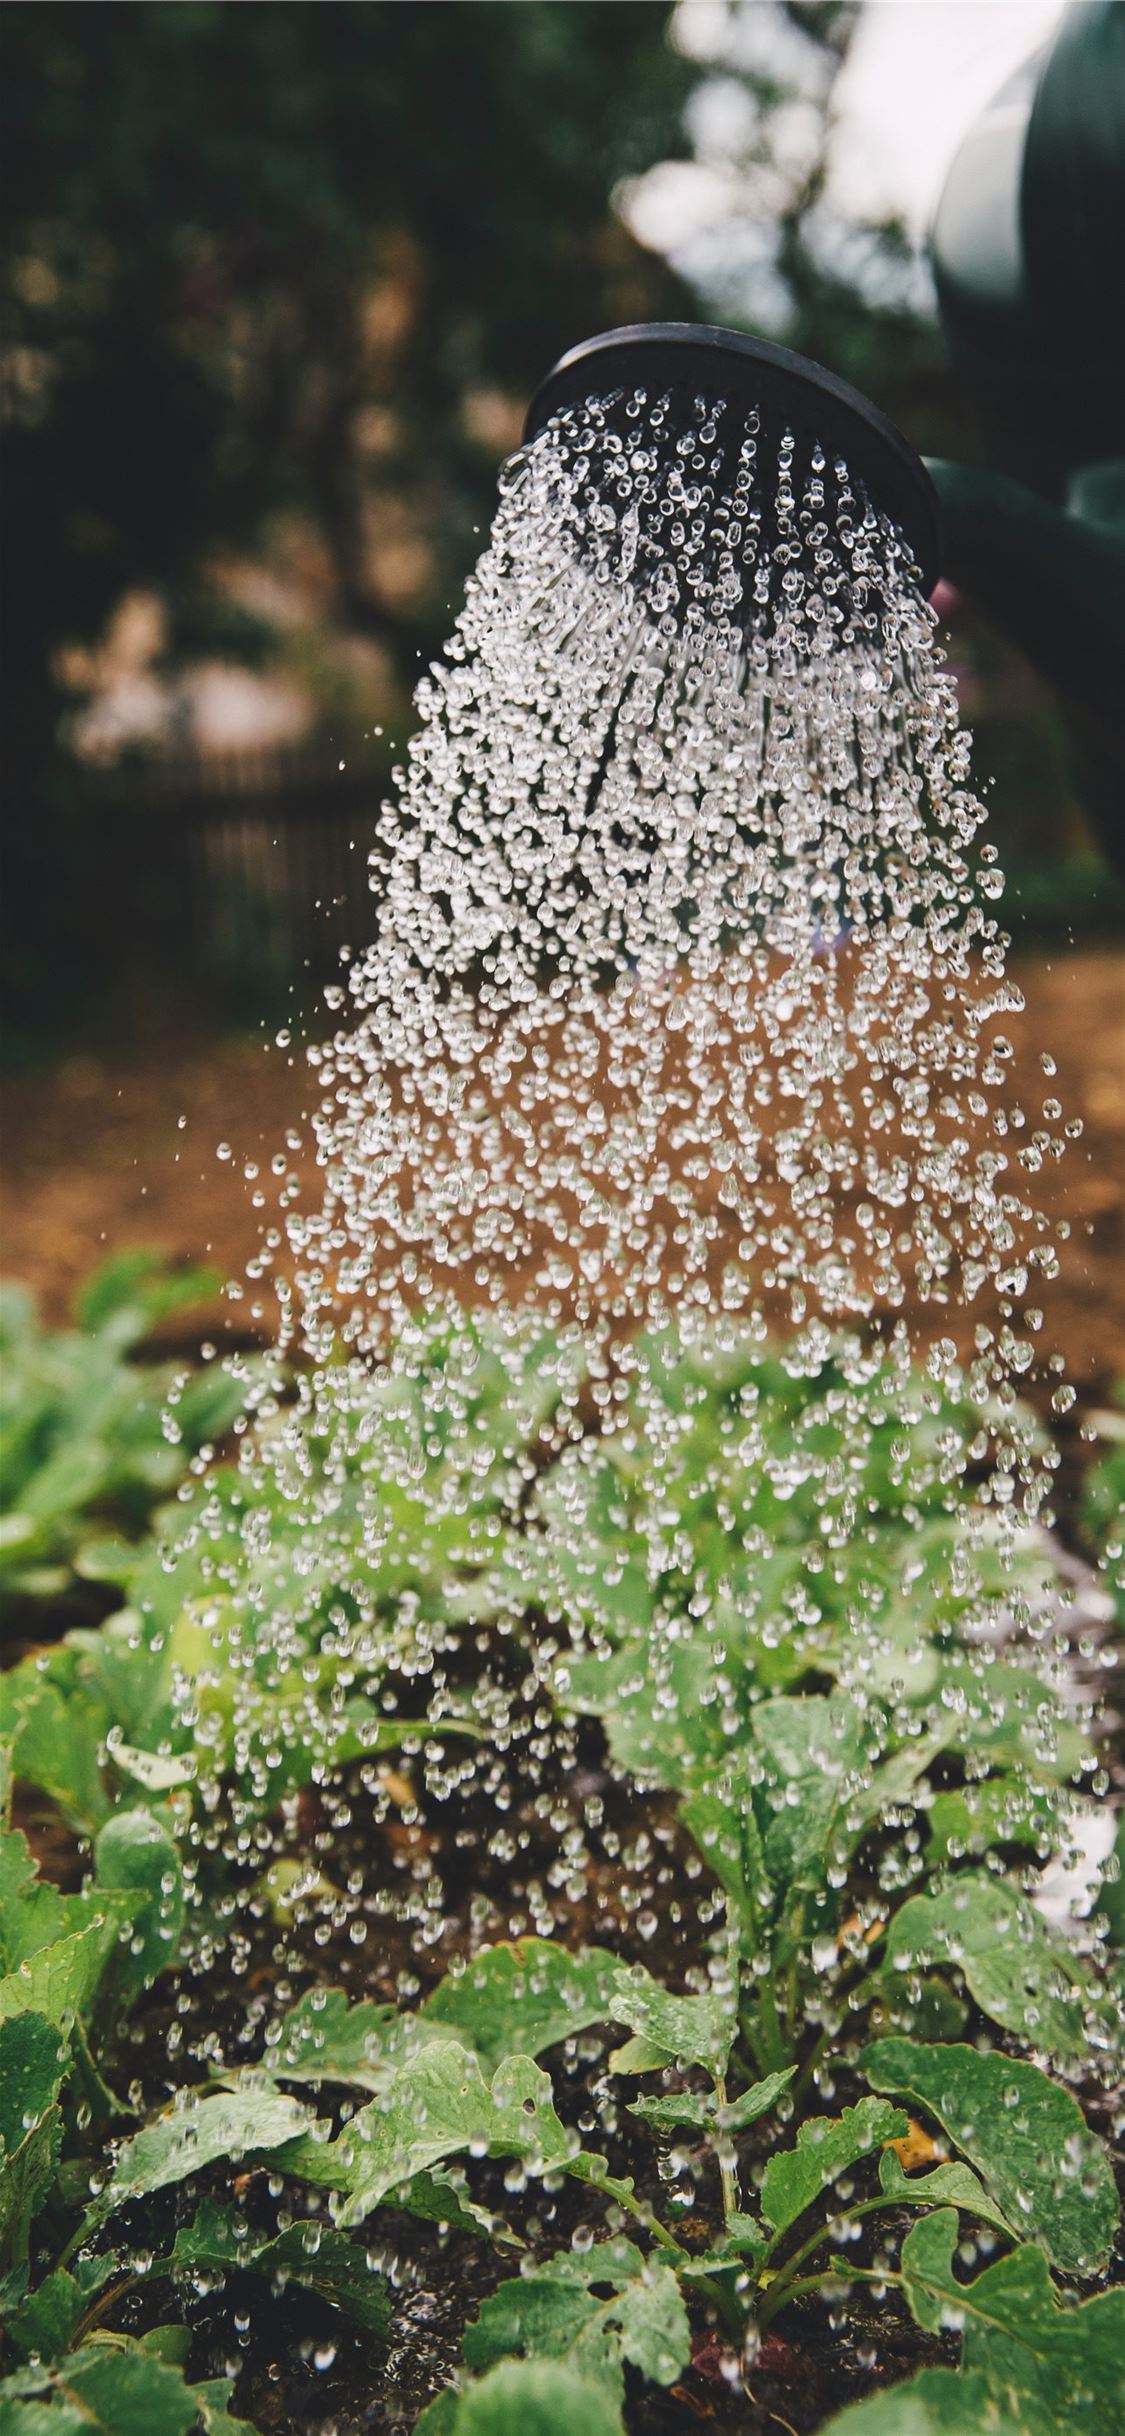 person watering plant iPhone X wallpaper 